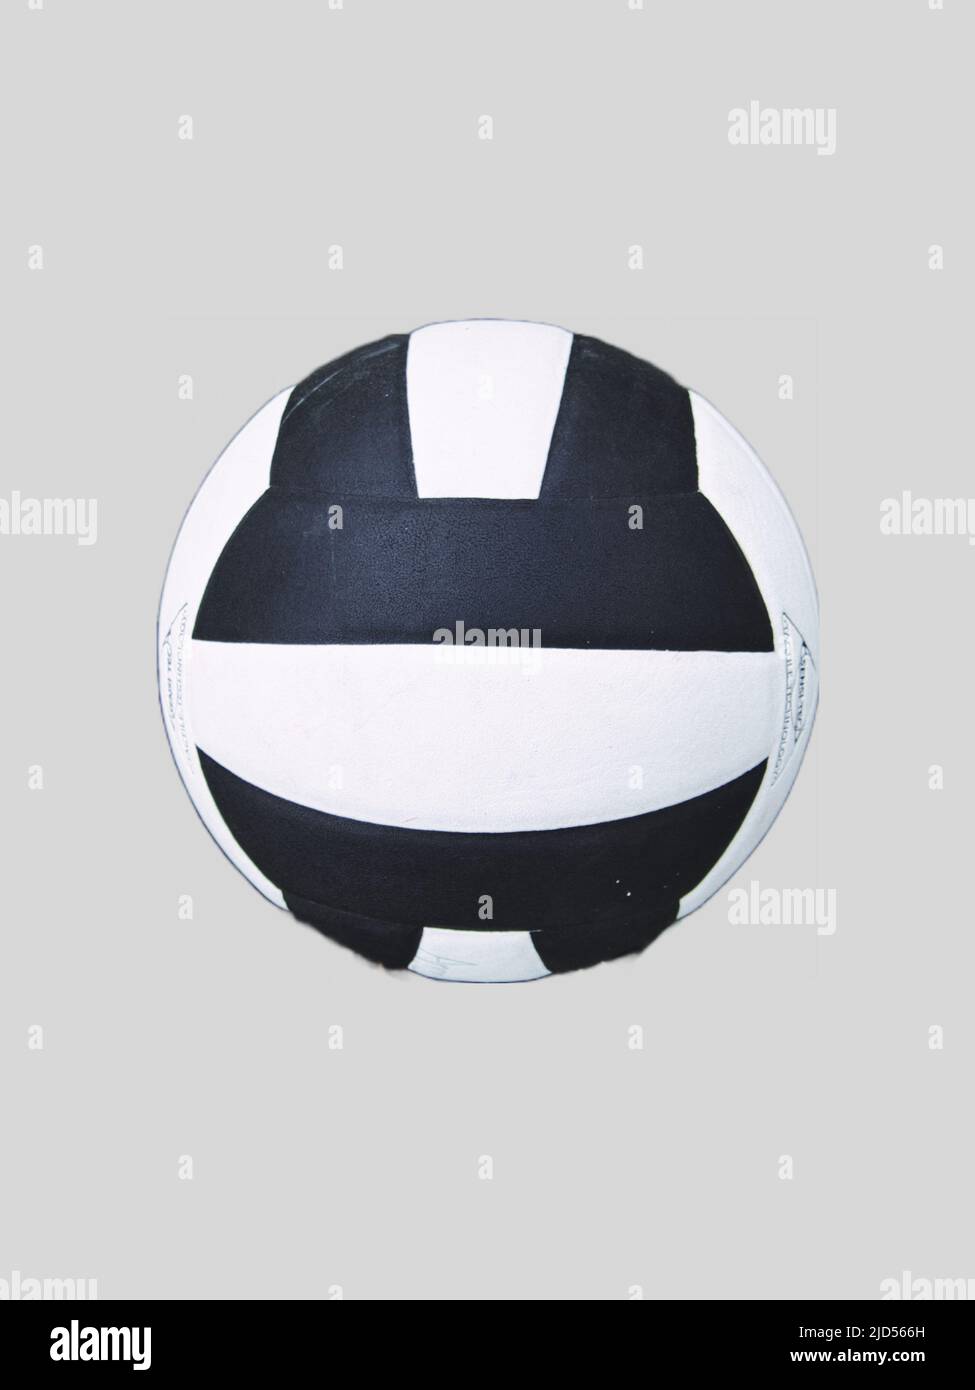 Black and White Volleyball with Simple Plain Background Stock Photo - Alamy